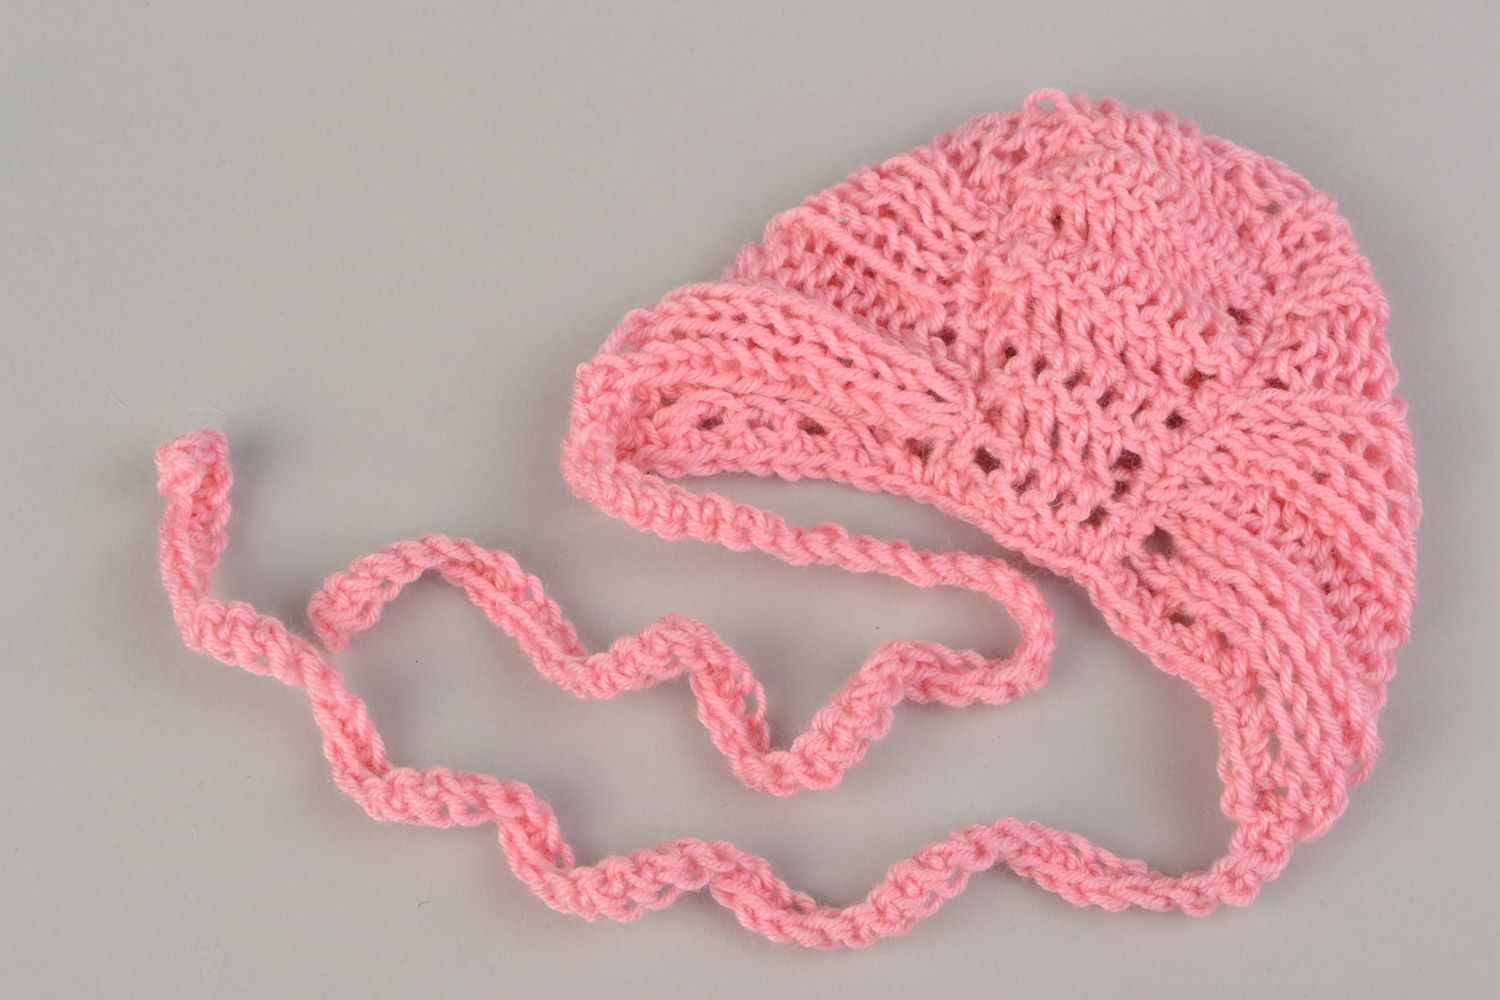 Handmade crocheted baby pink hat made of acrylic yarns for girls clothes for children photo 4